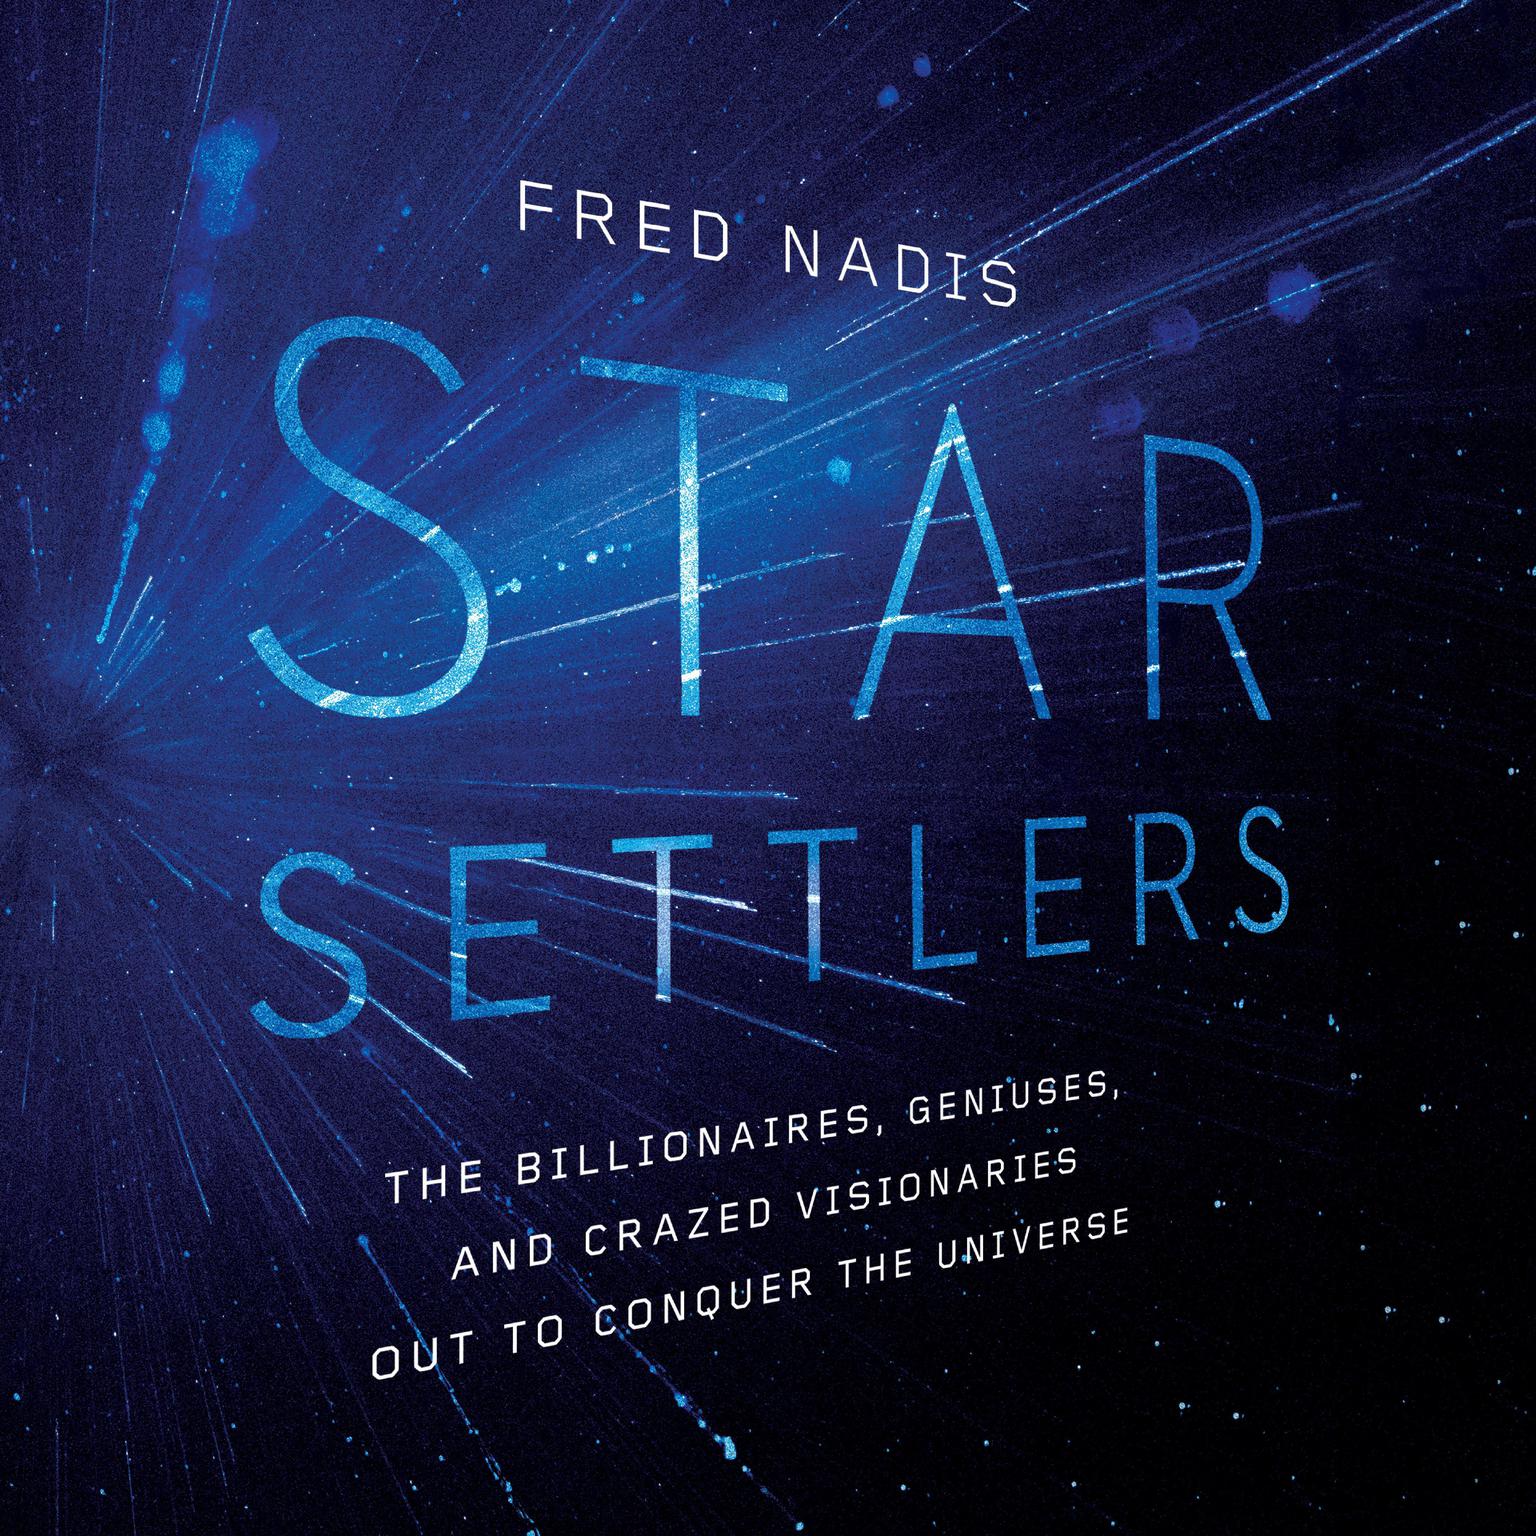 Star Settlers: The Billionaires, Geniuses, and Crazed Visionaries Out to Conquer the Universe Audiobook, by Fred Nadis